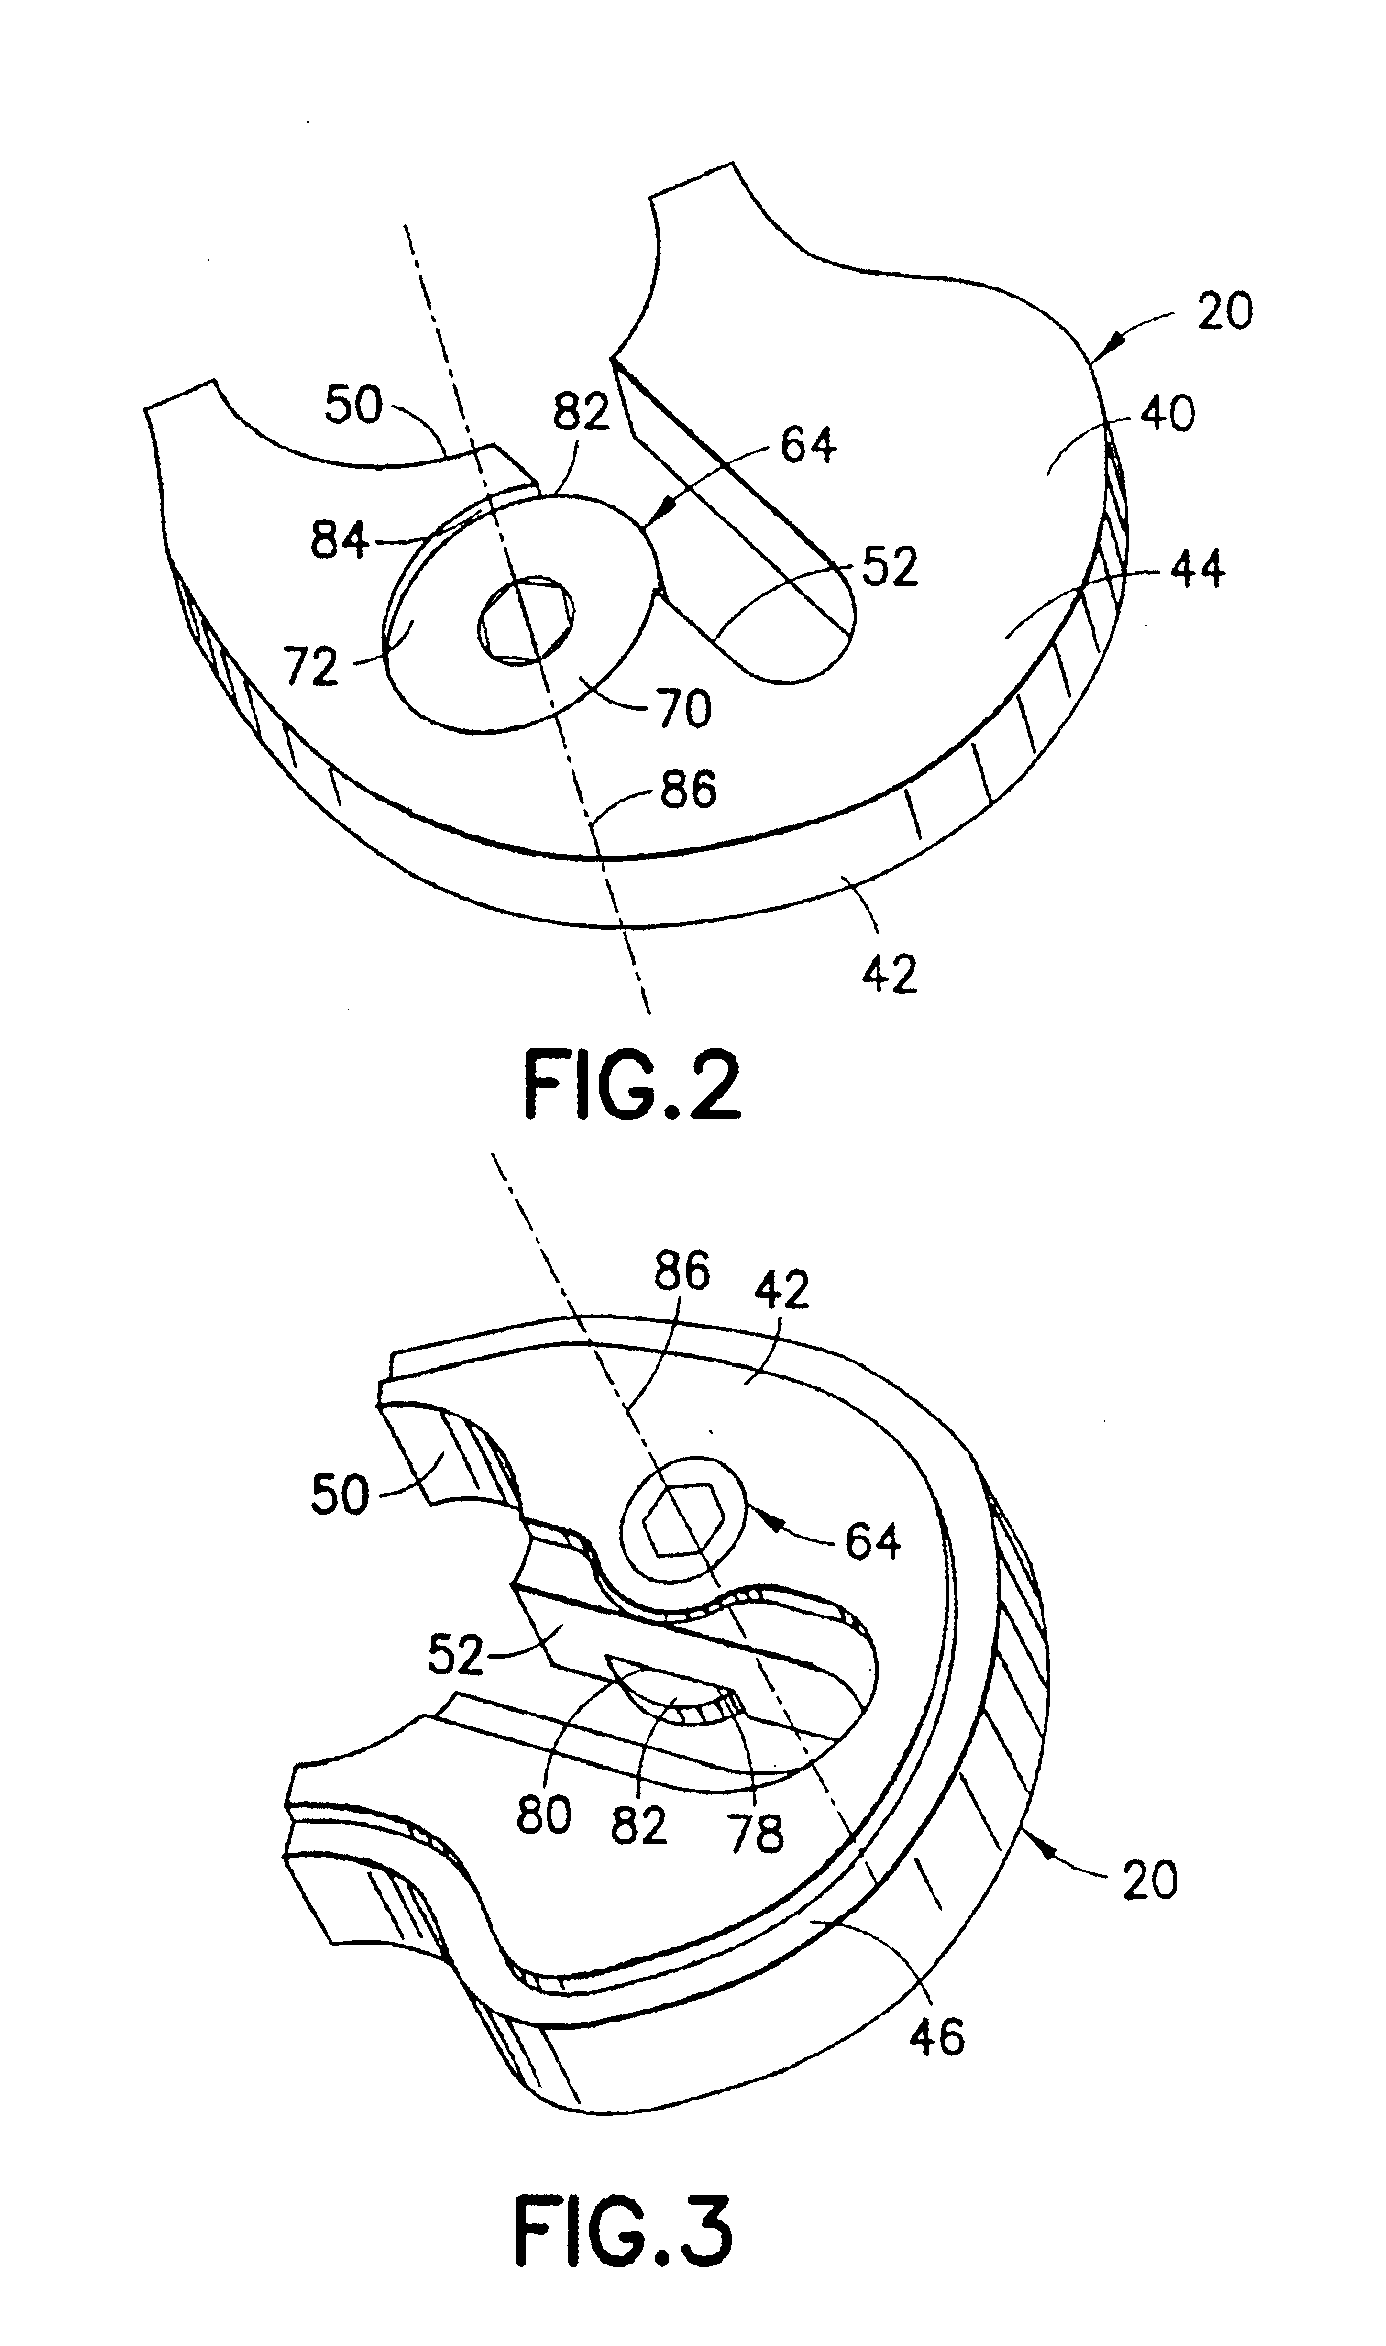 Securing an augment to a prosthetic implant component